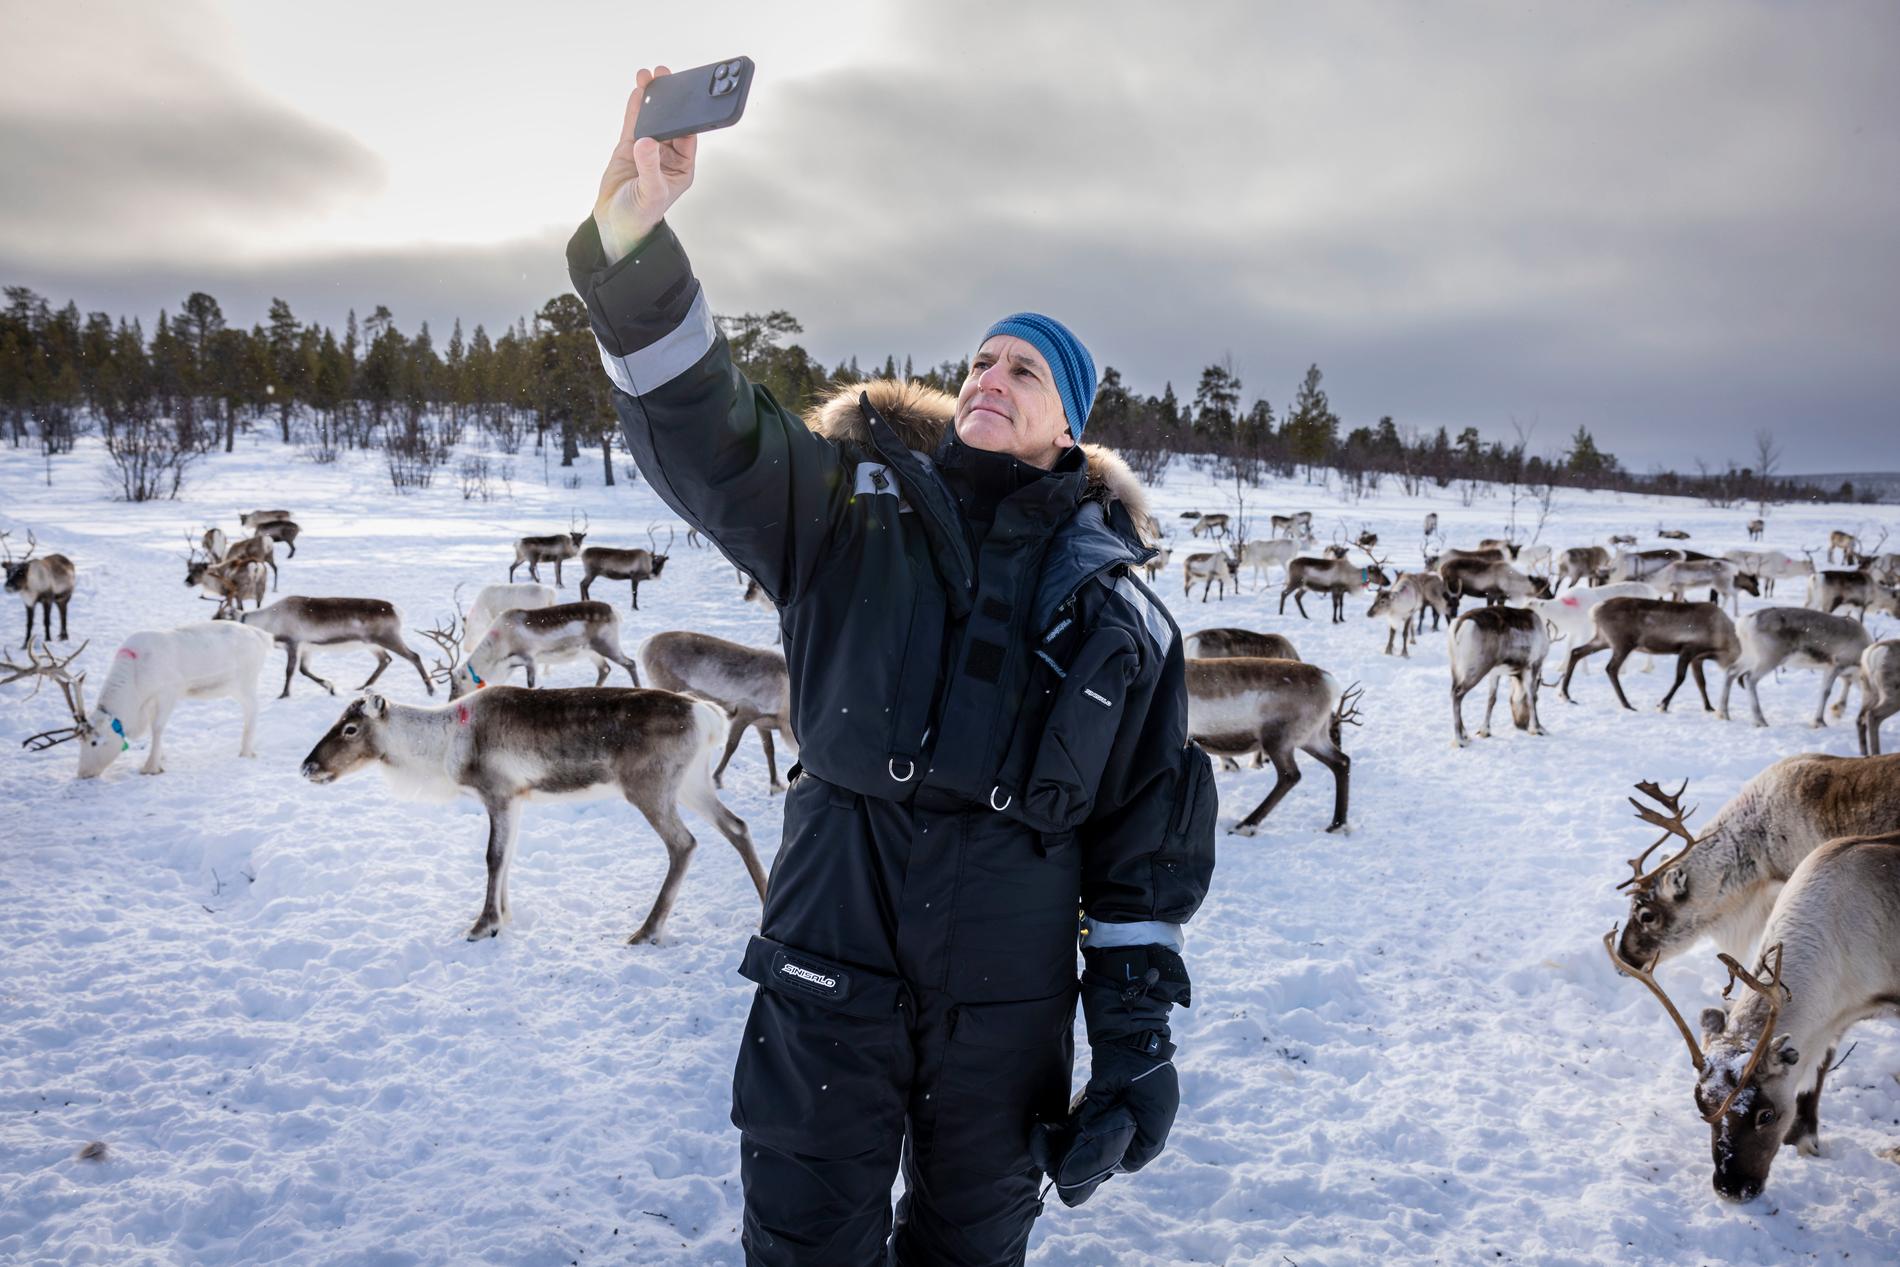 FRIERFERD: Jonas Kar Storr has been to Finnmark several times - since he visited the reindeer herders this winter after the Fossen demonstrations in Oslo.  However, voters in traditional Andhra have turned their backs on him.